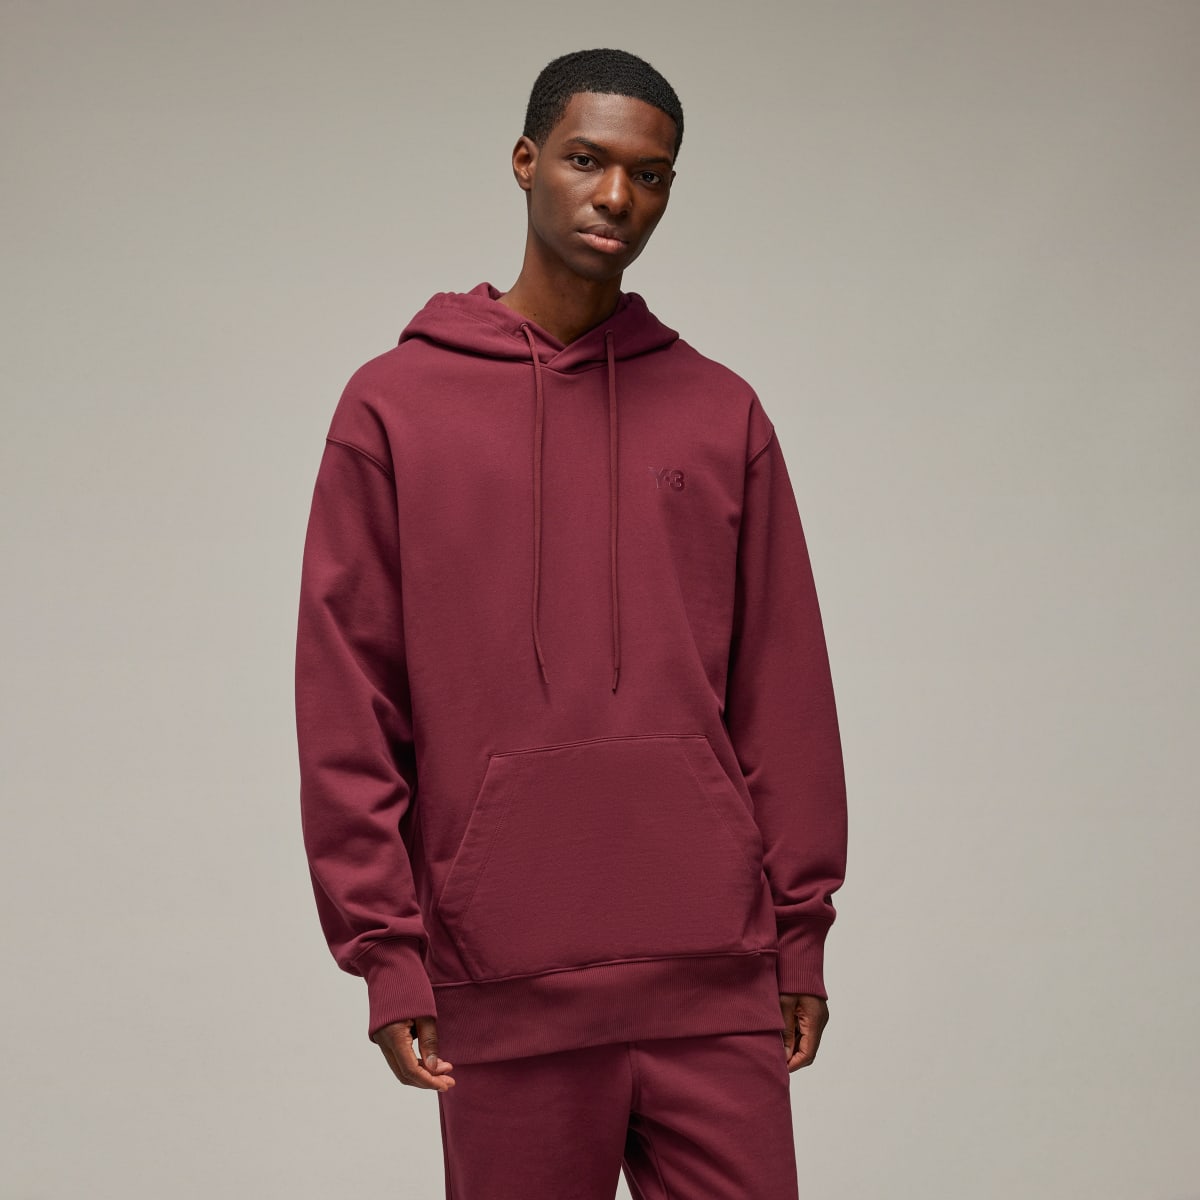 Adidas Y-3 French Terry Hoodie. 3